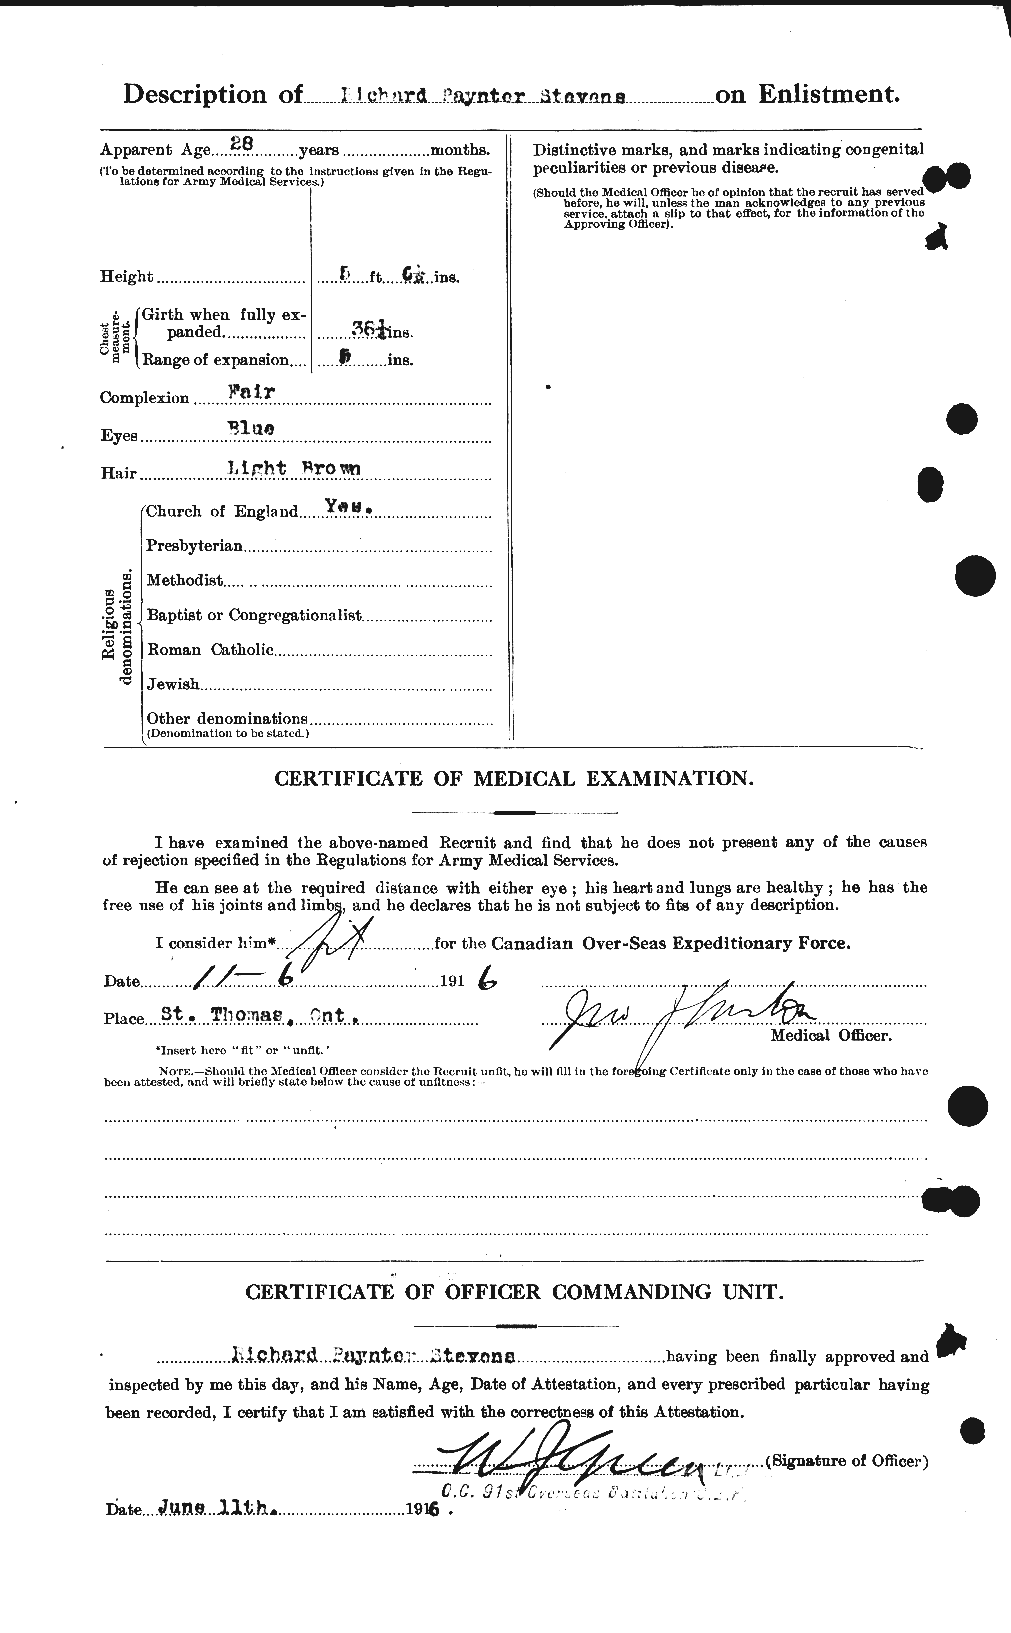 Personnel Records of the First World War - CEF 118305b